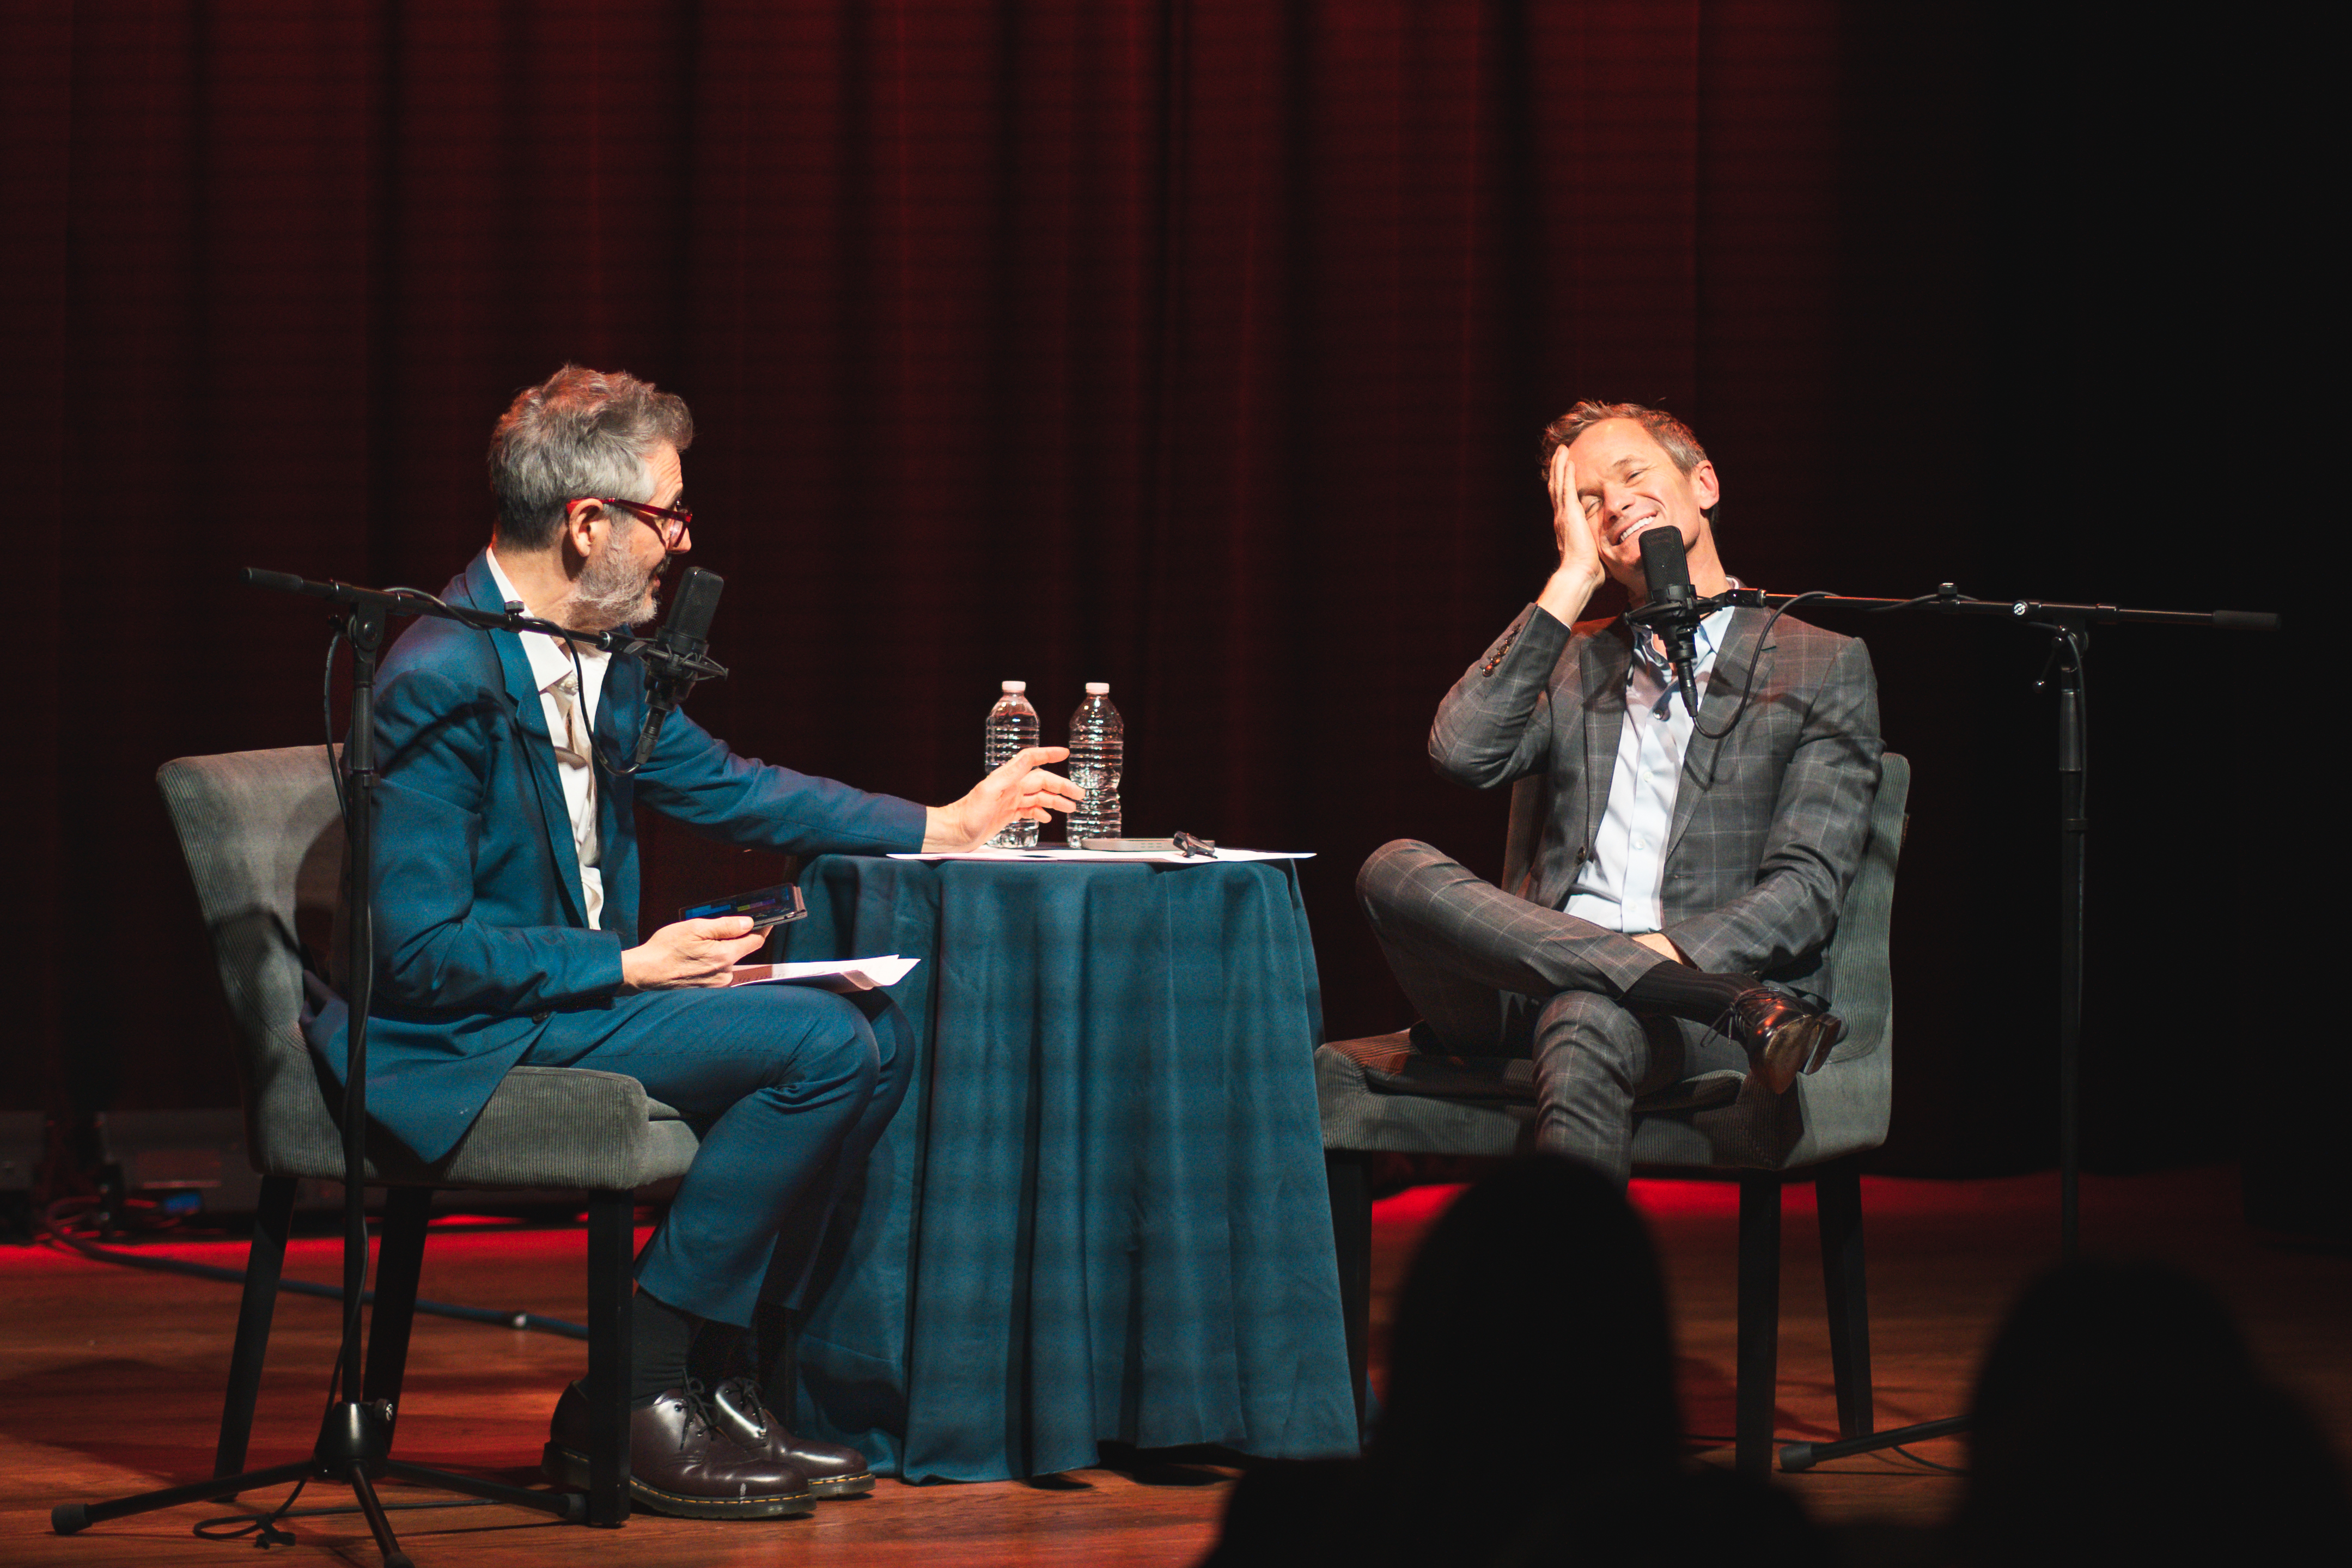 Neil Patrick Harris and Ira Glass on stage